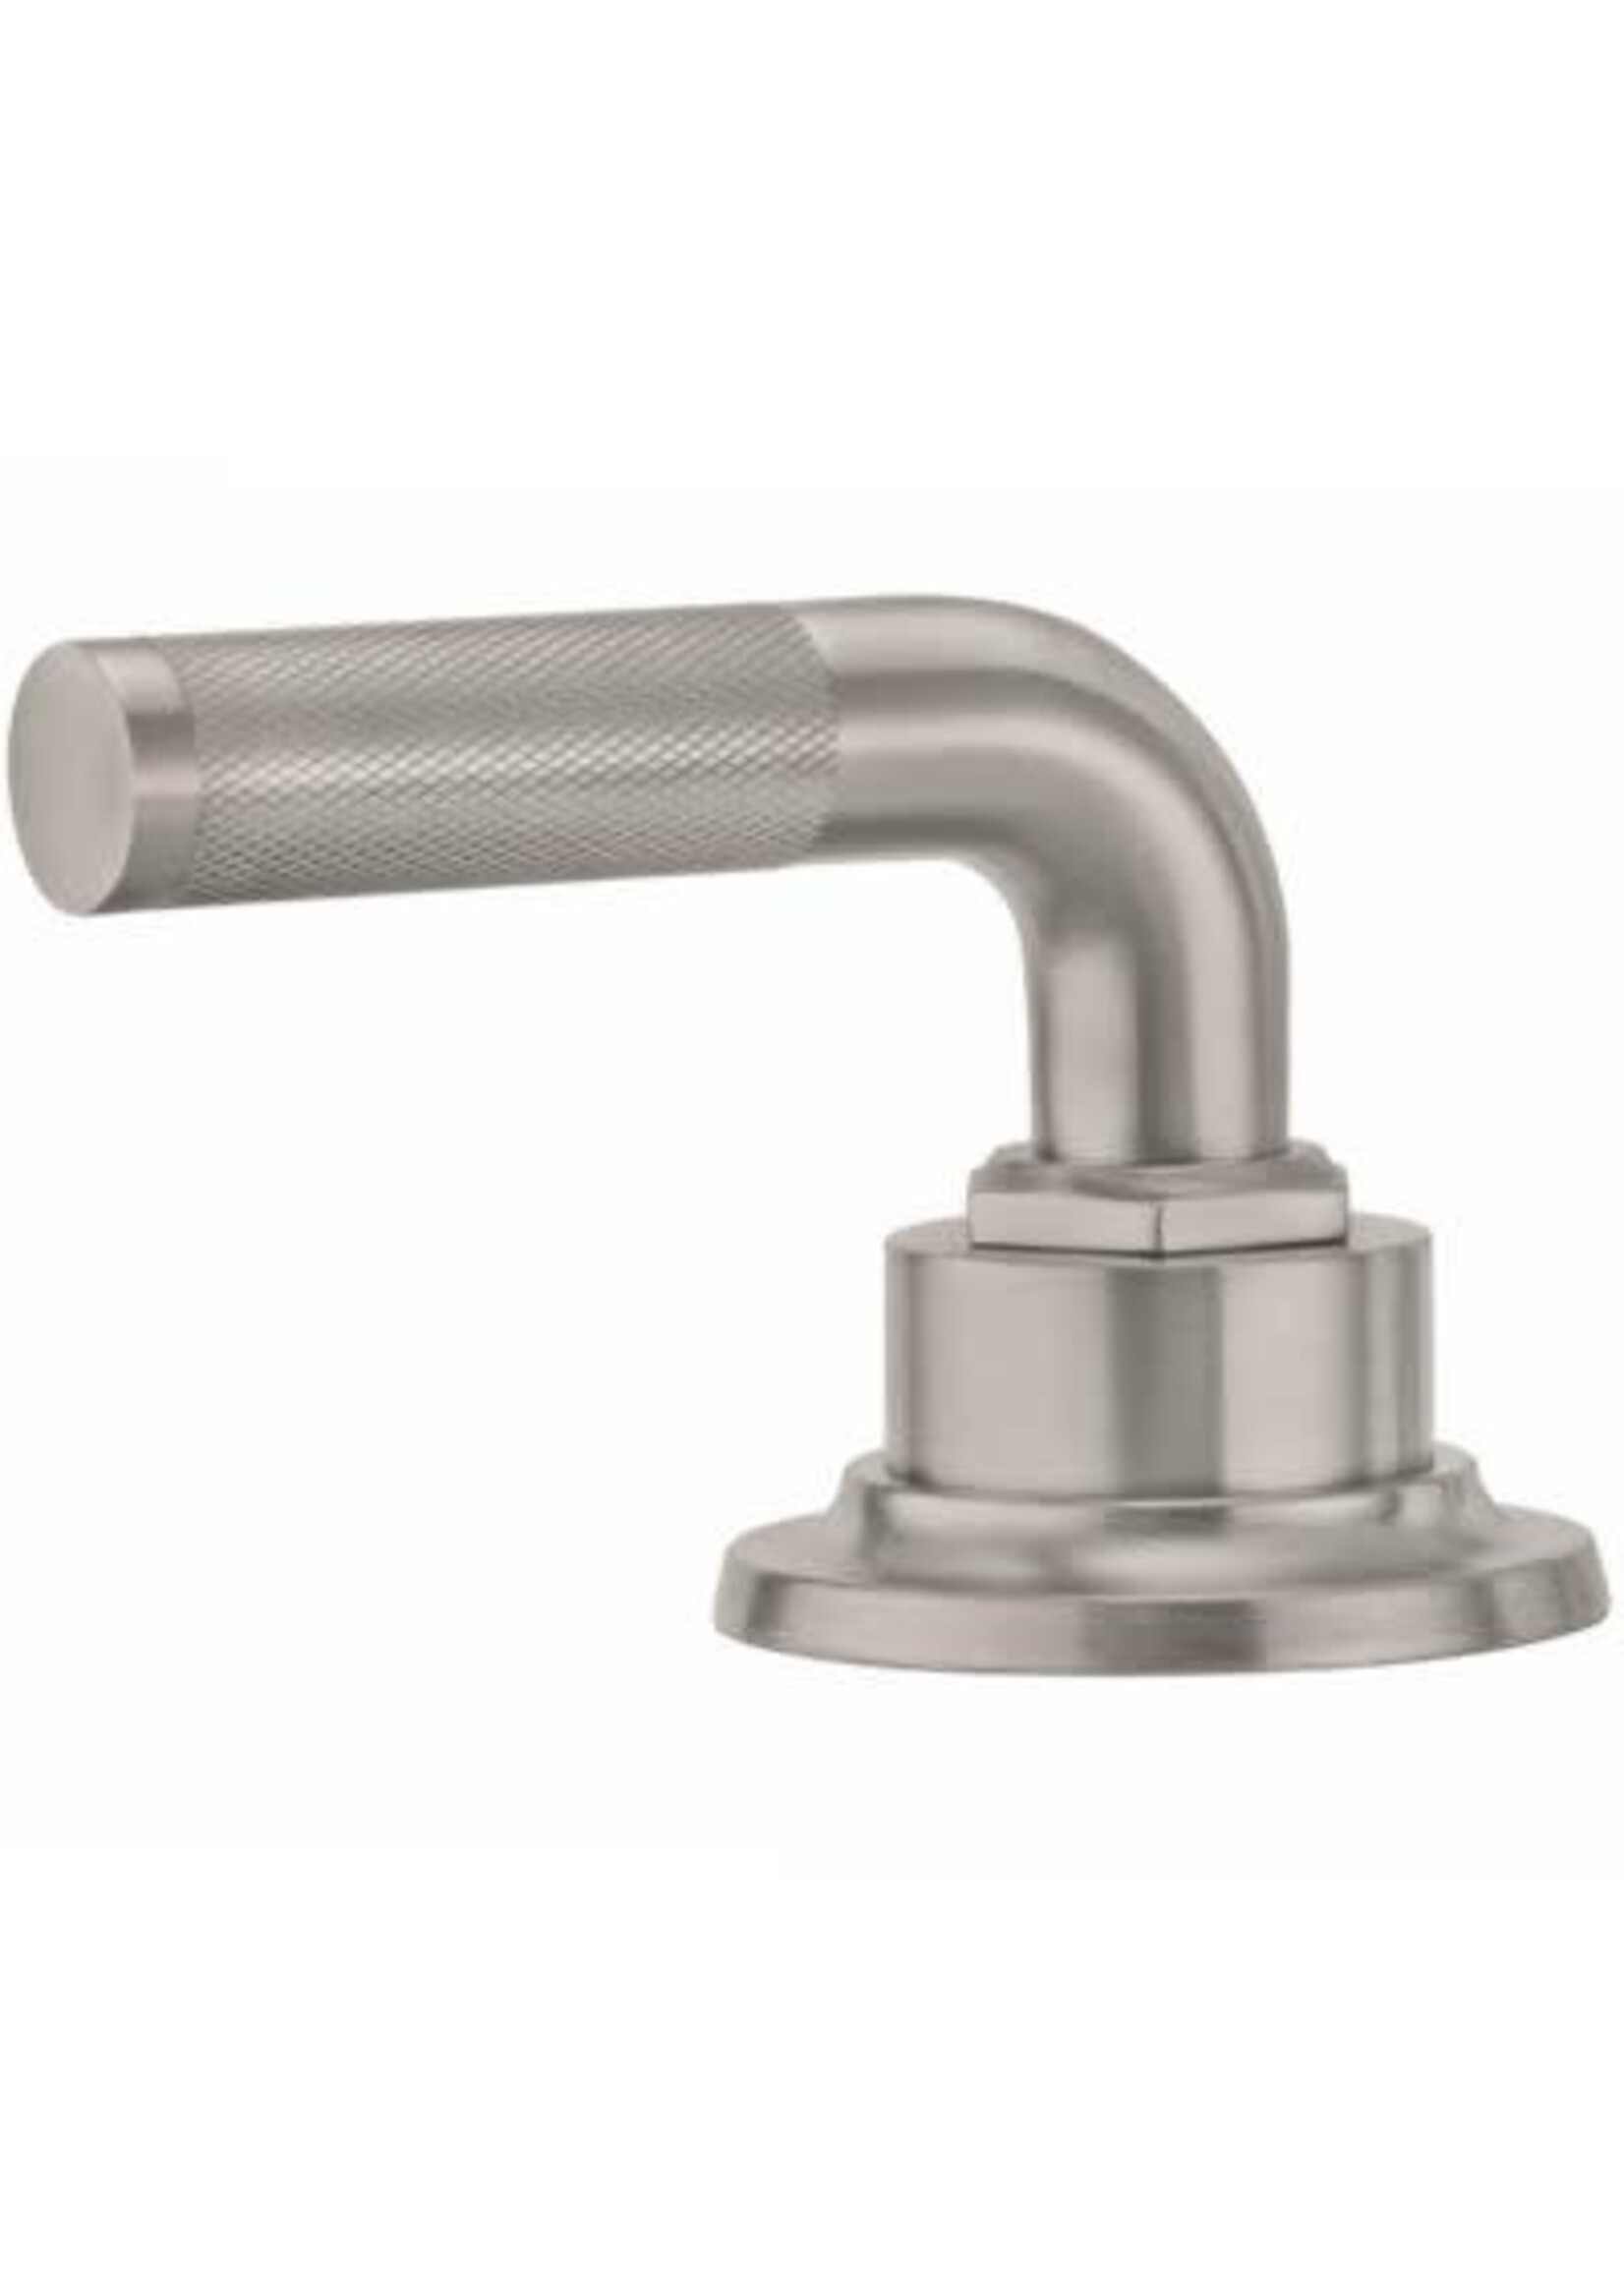 California Faucets California Faucets Avalon 8" Widespread Lavatory Faucet